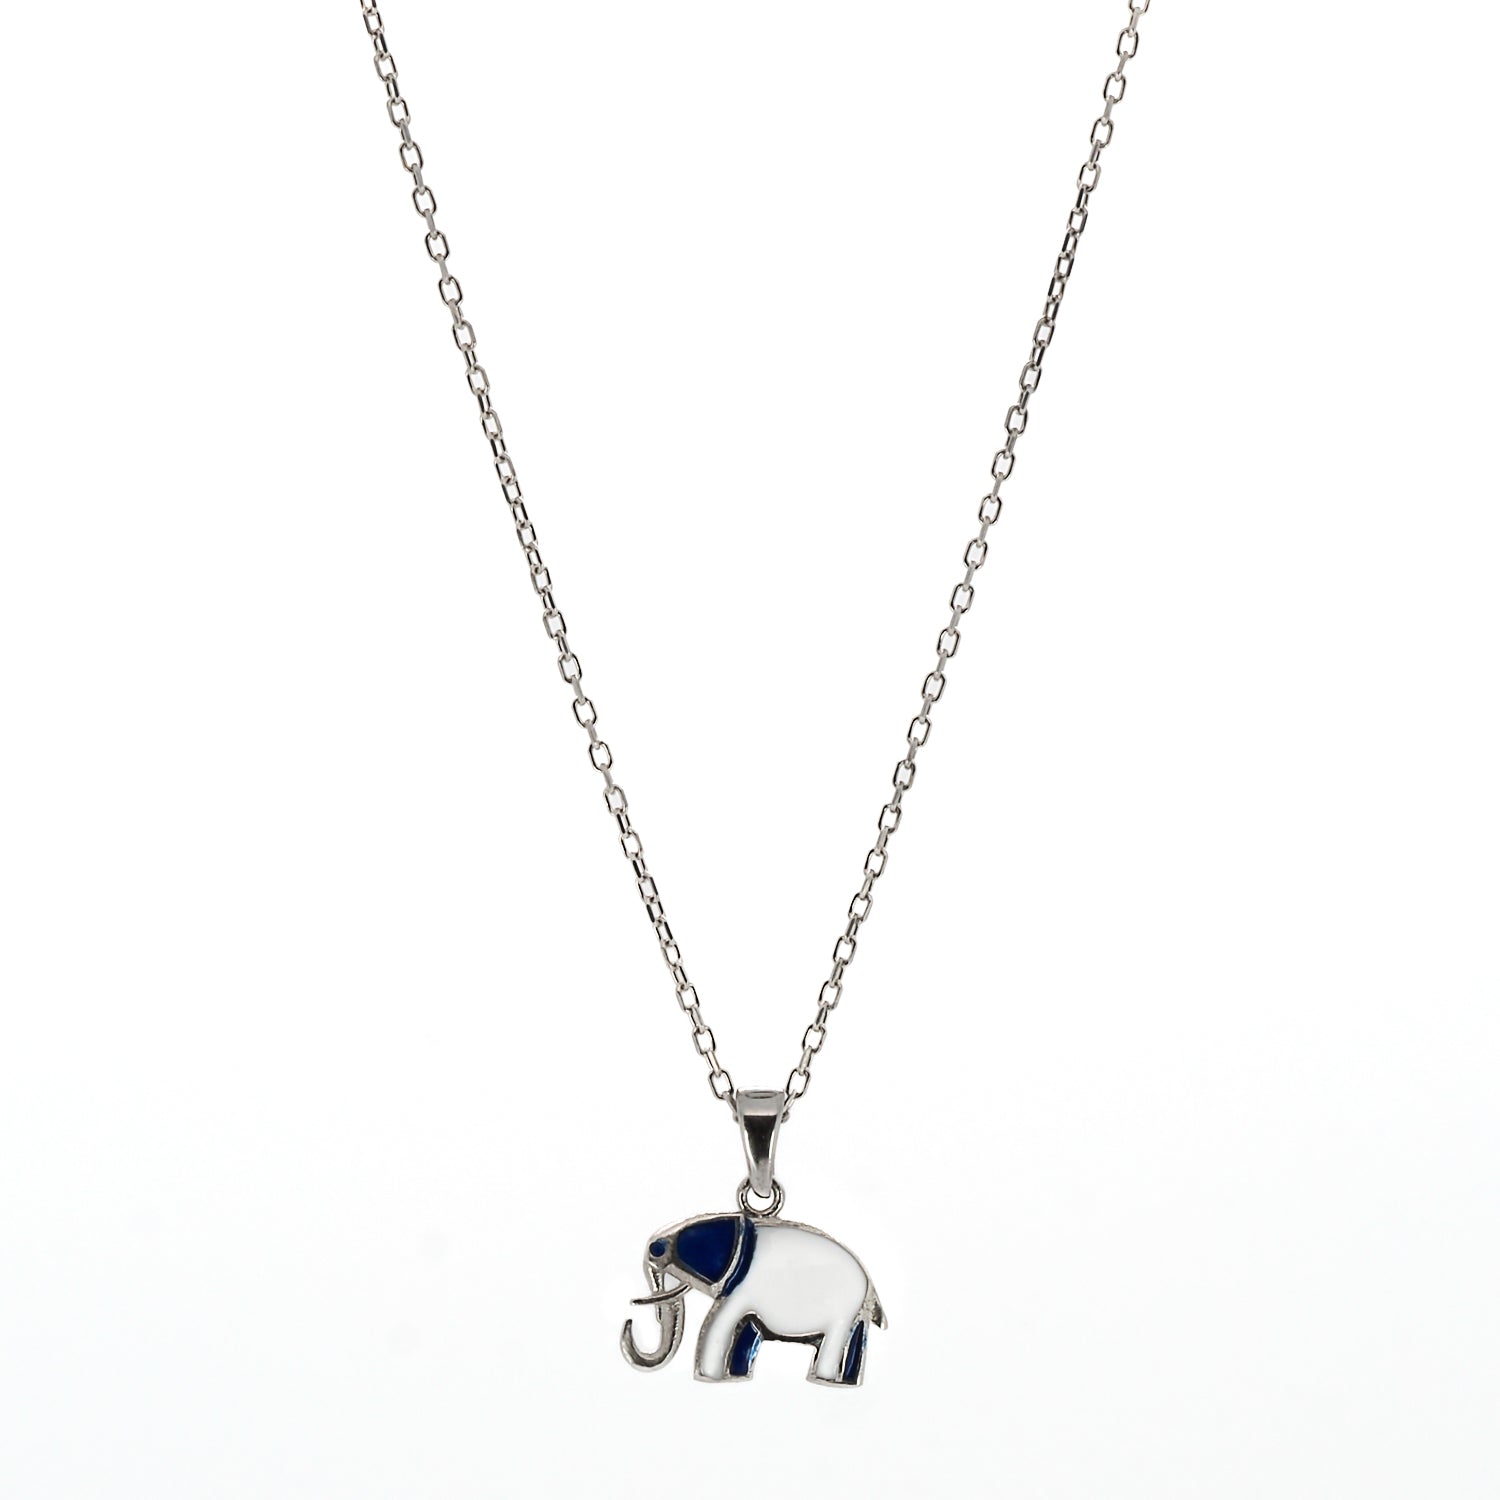 Close-up shot of the beautifully crafted elephant pendant on the Sterling Silver Blue Elephant Necklace, showcasing the exquisite details and enamel work.